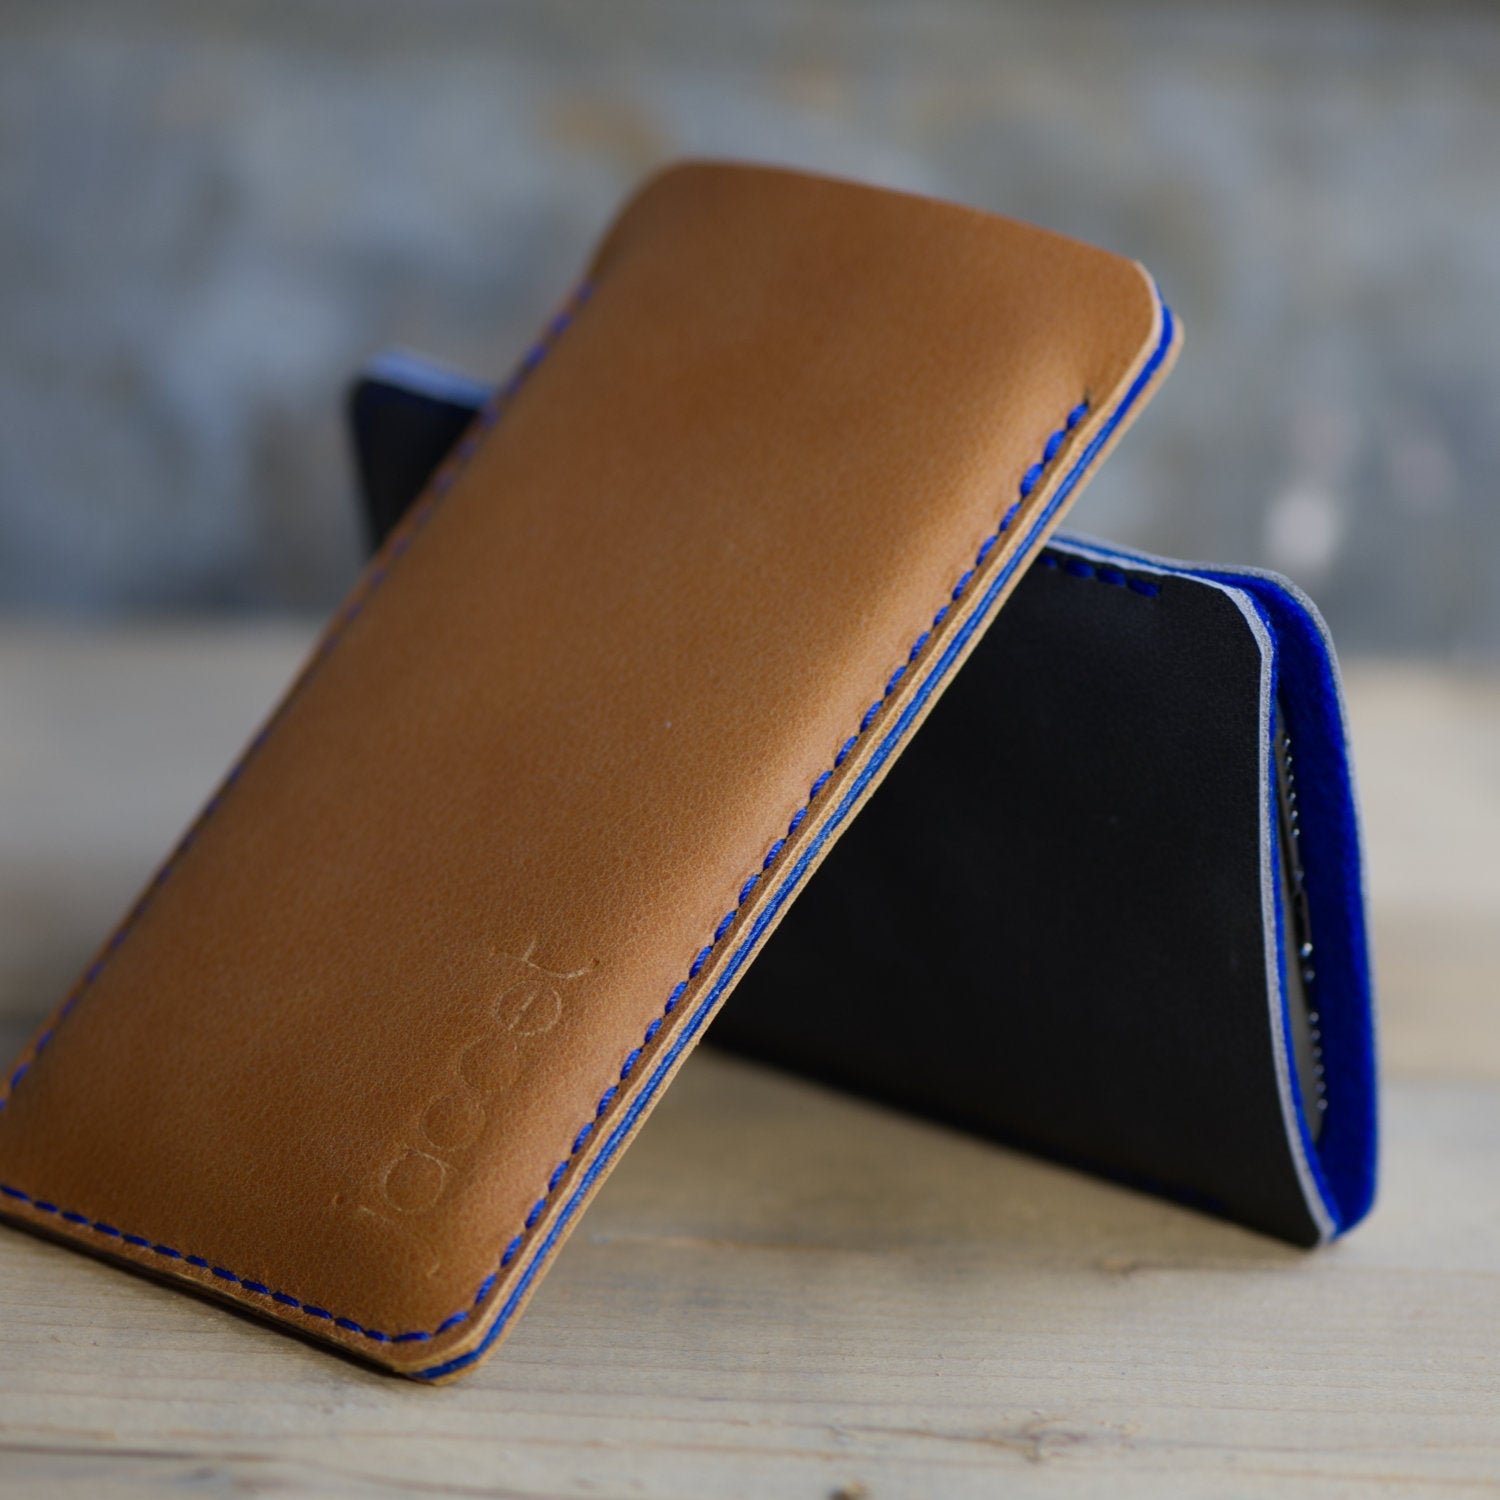 JACCET leather OnePlus sleeve - Cognac color leather with blue wool felt - 100% Handmade